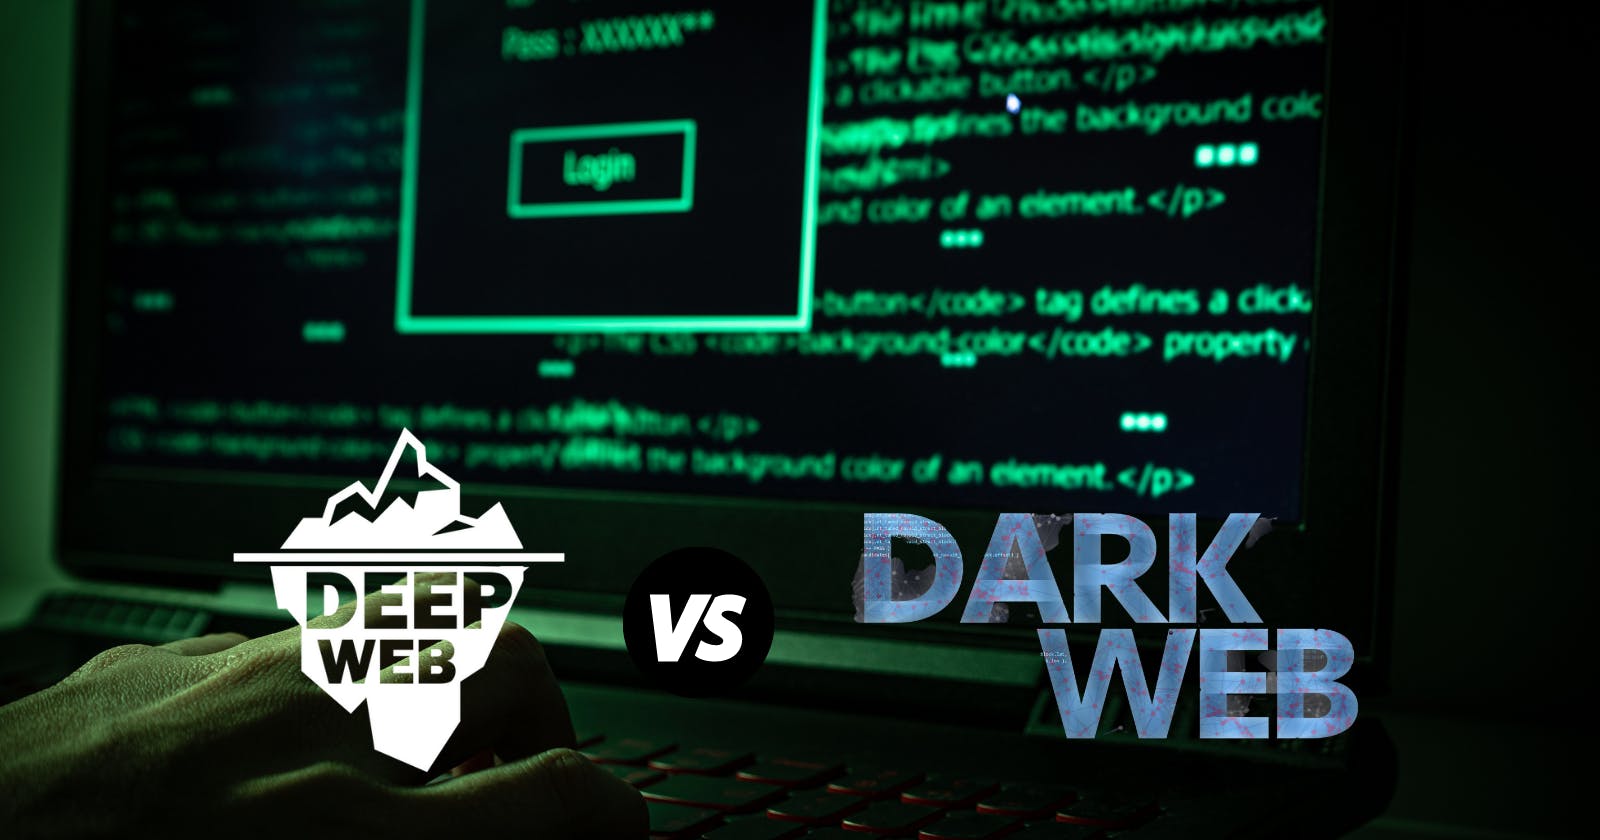 What is Deep Web and Dark Web?